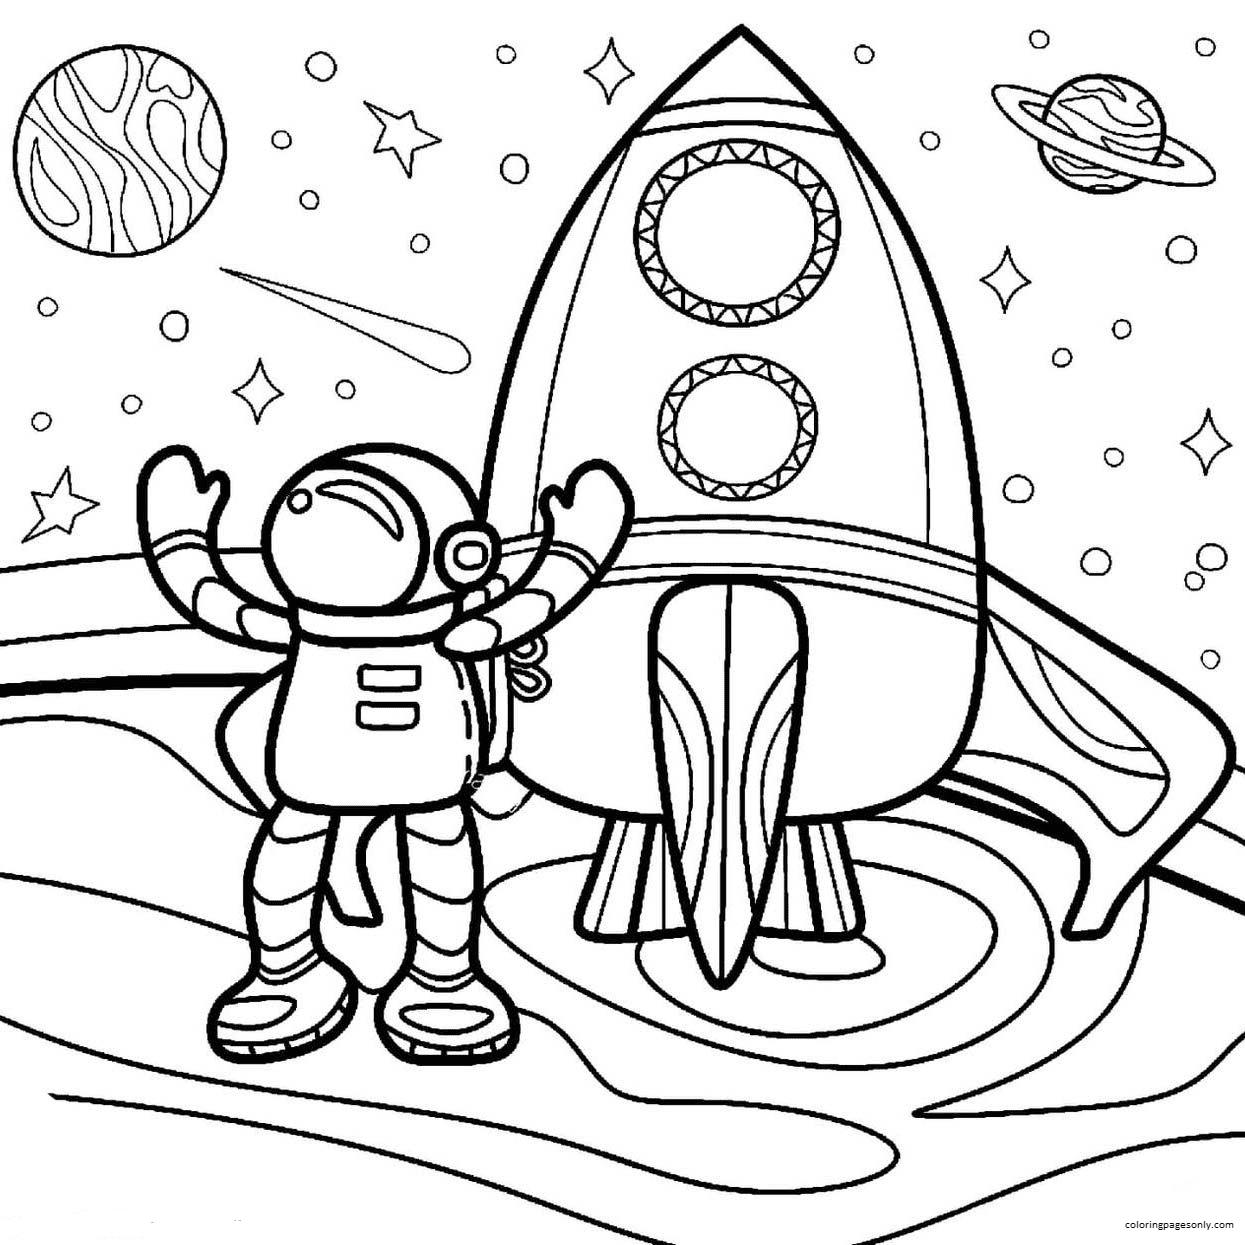 Cartoon Astronaut With Rocket Coloring Page